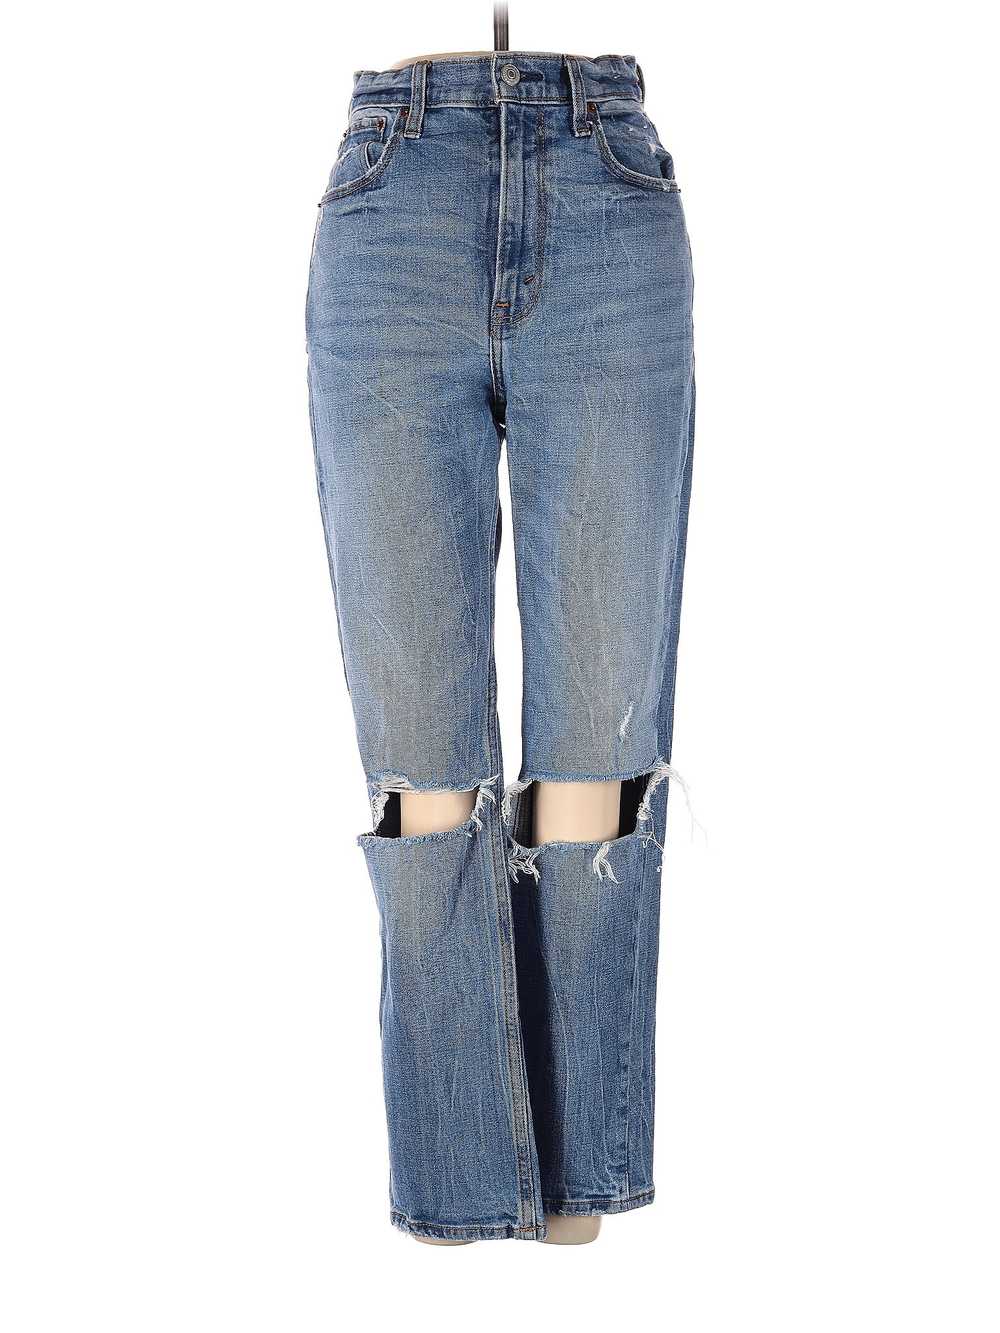 Abercrombie & Fitch Women Blue Jeans 00 - image 1